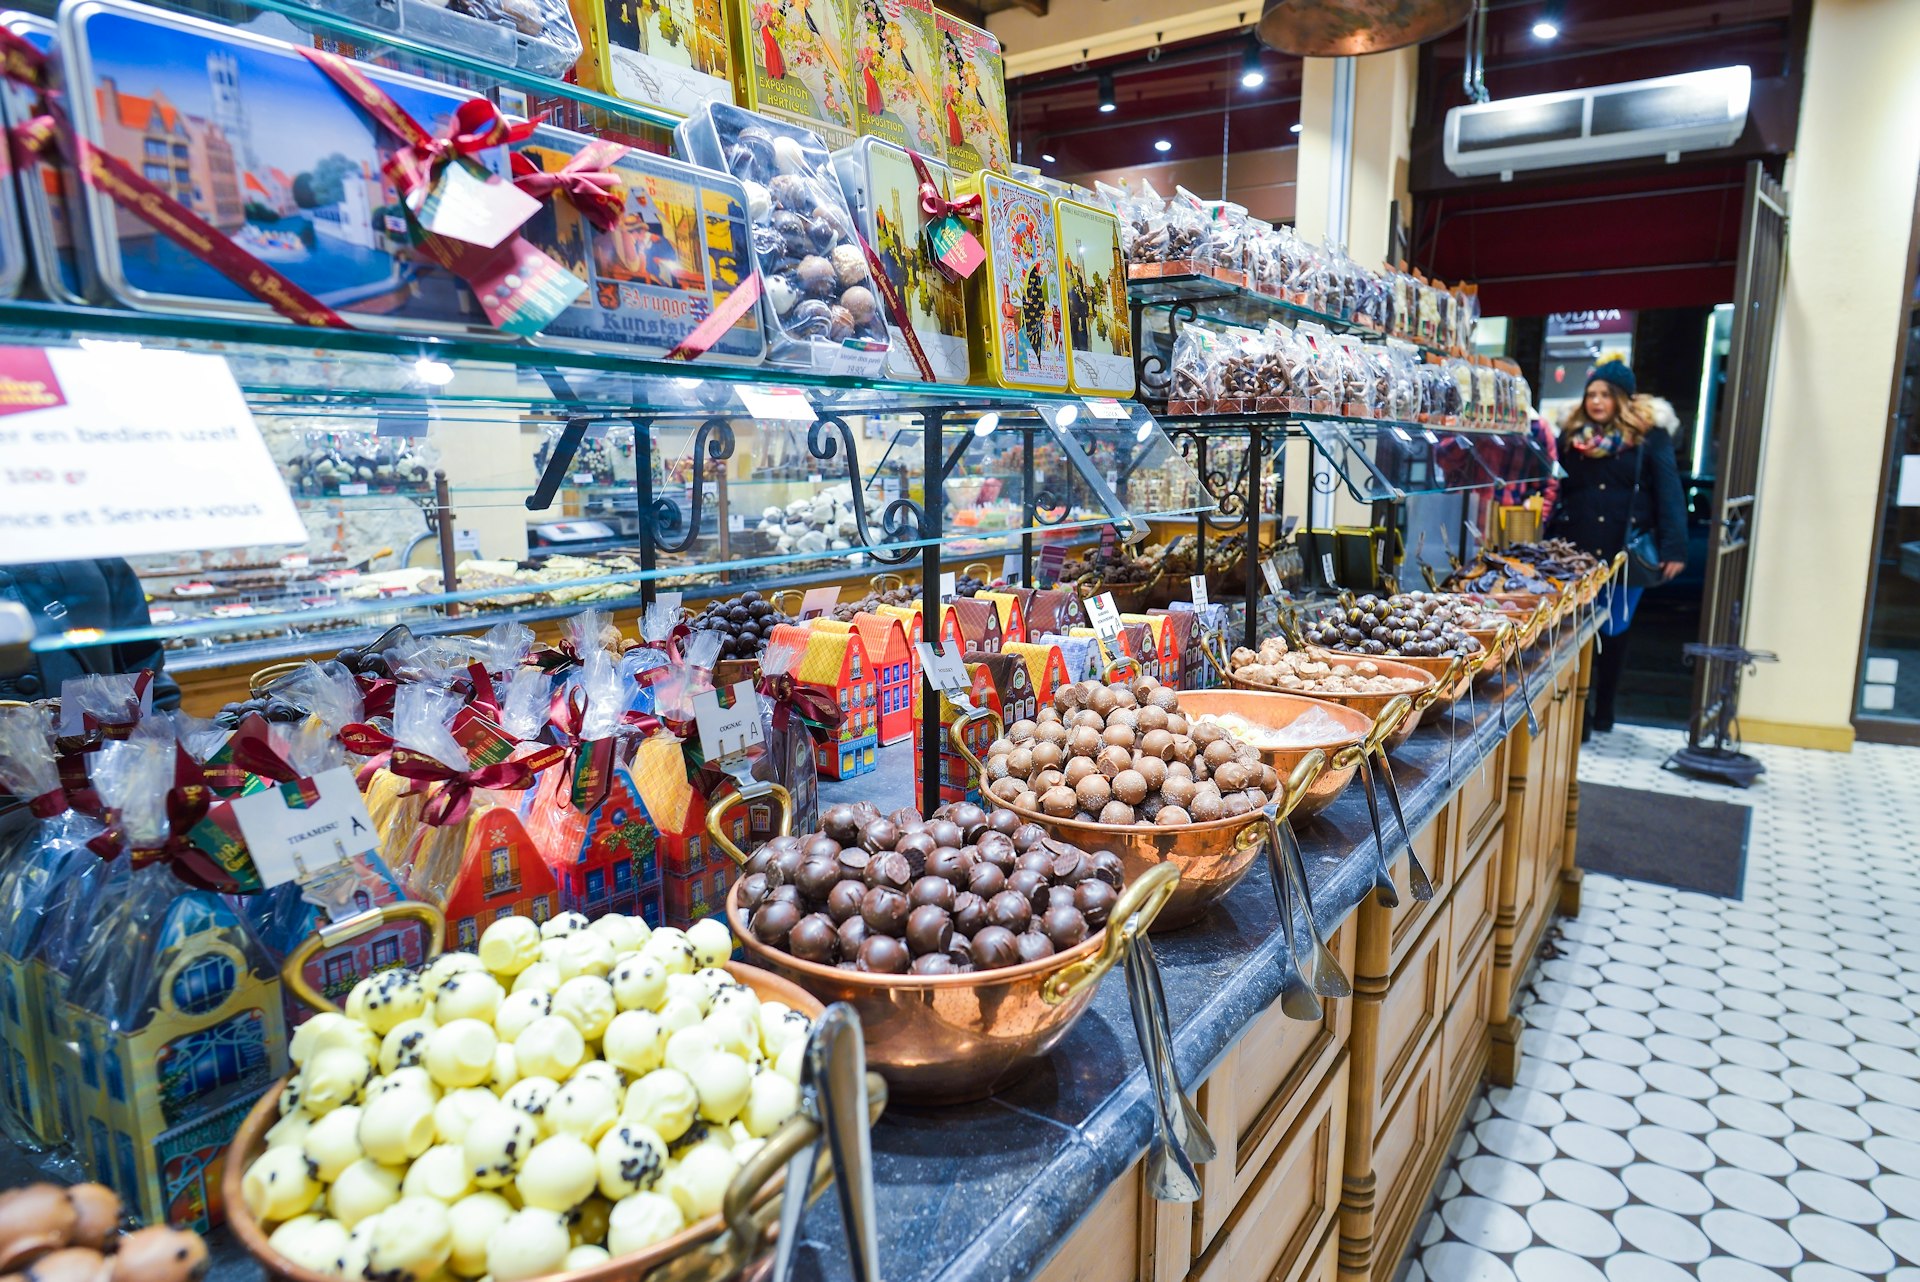 Interior shot of a chocolate shop with a variety of sweets and belgian chocolate